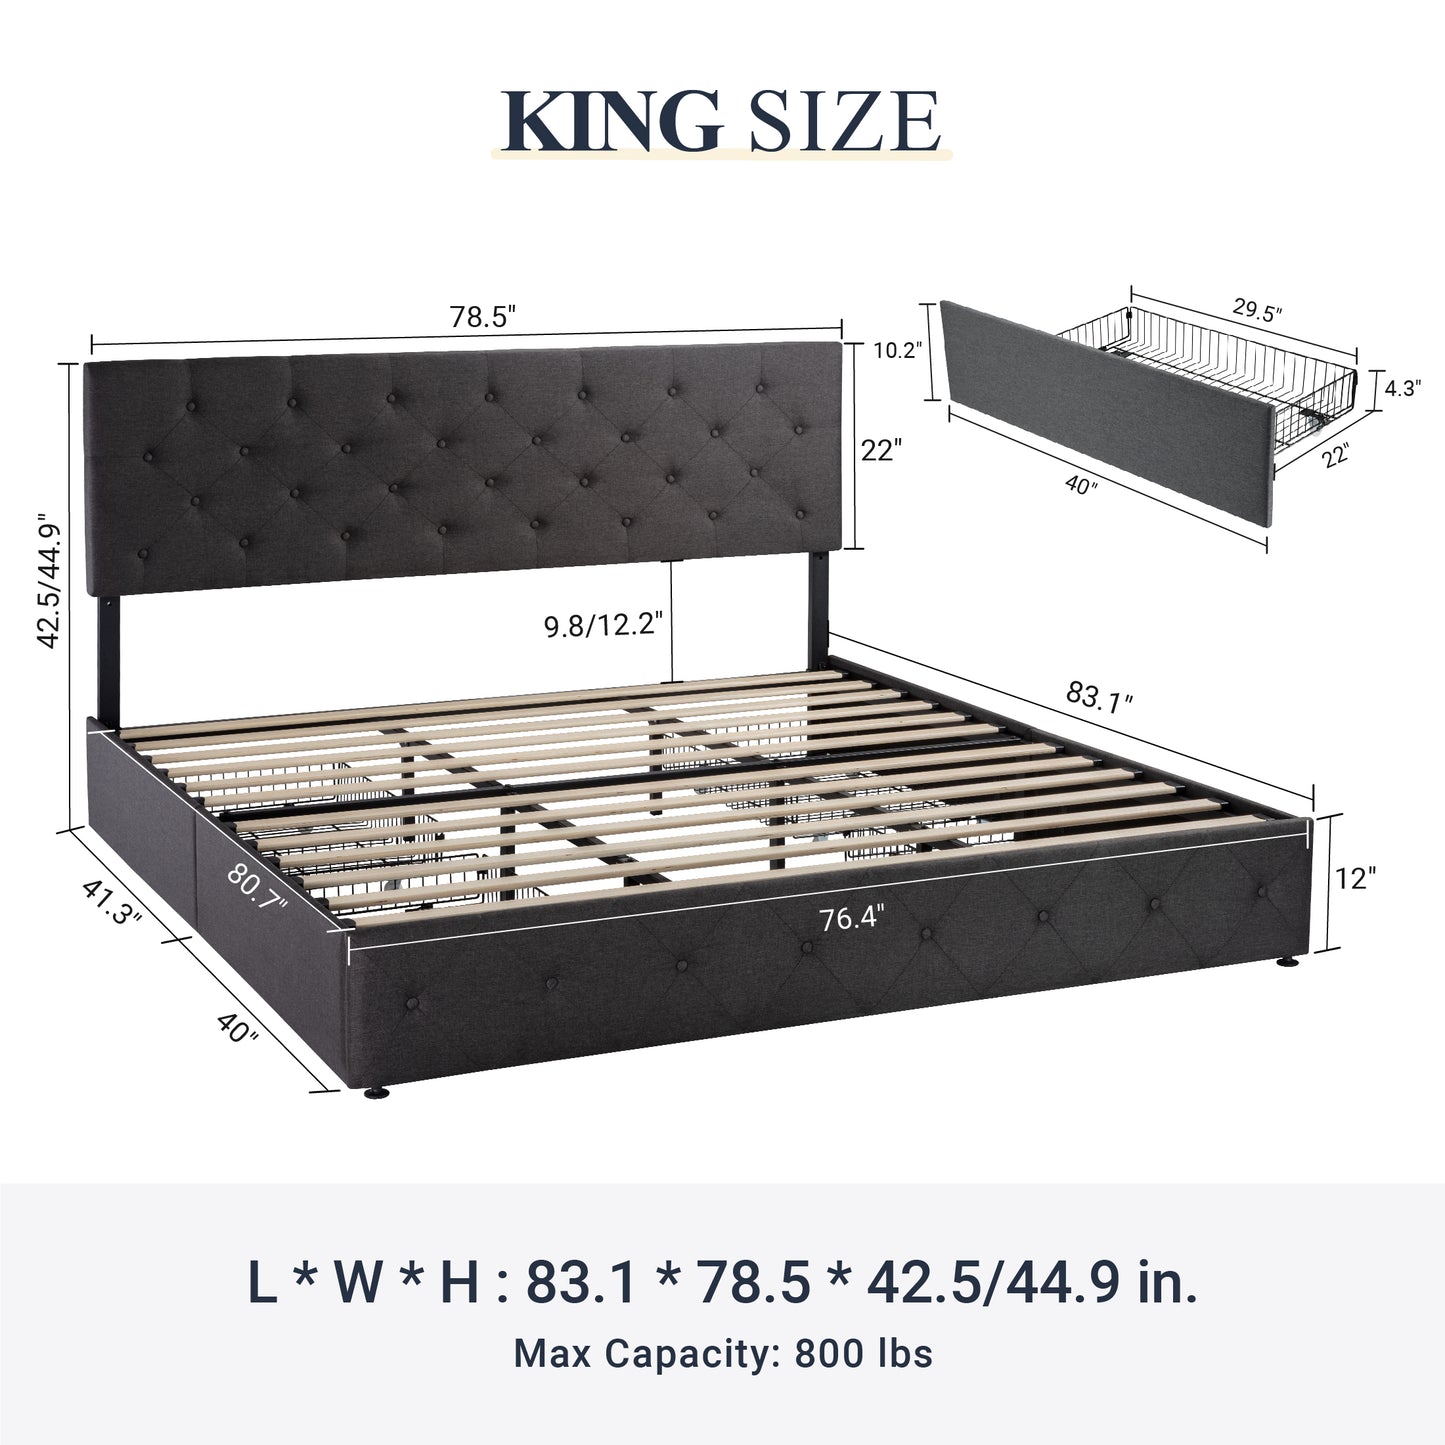 Allewie Queen Platform Bed Frame with 4 Drawers Storage and Headboard, Diamond Stitched Button Tufted Upholstered Mattress Foundation with Wood Slat Support, Dark Grey